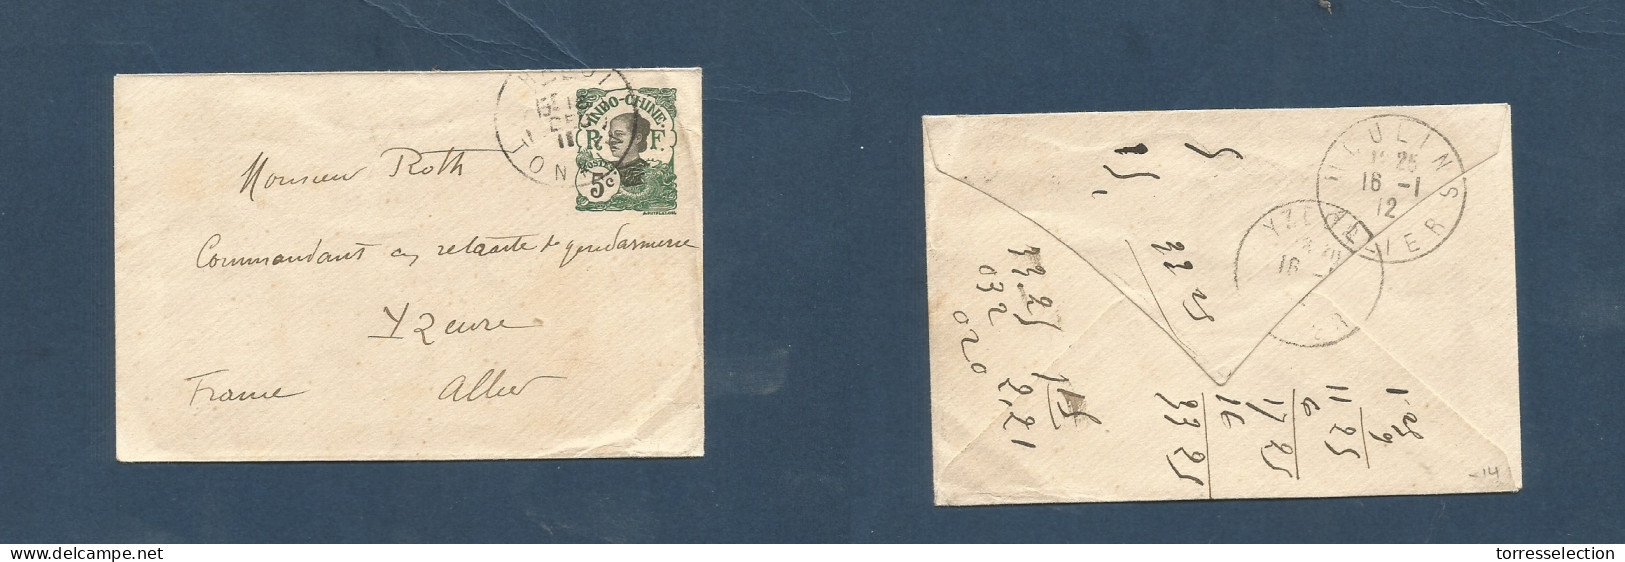 INDOCHINA. 1911 (18 Dec) Hanoi - France, Allier (16 Jan 12) Unsealed 5c Stat Env, Tied Cds. VF. XSALE. - Asia (Other)